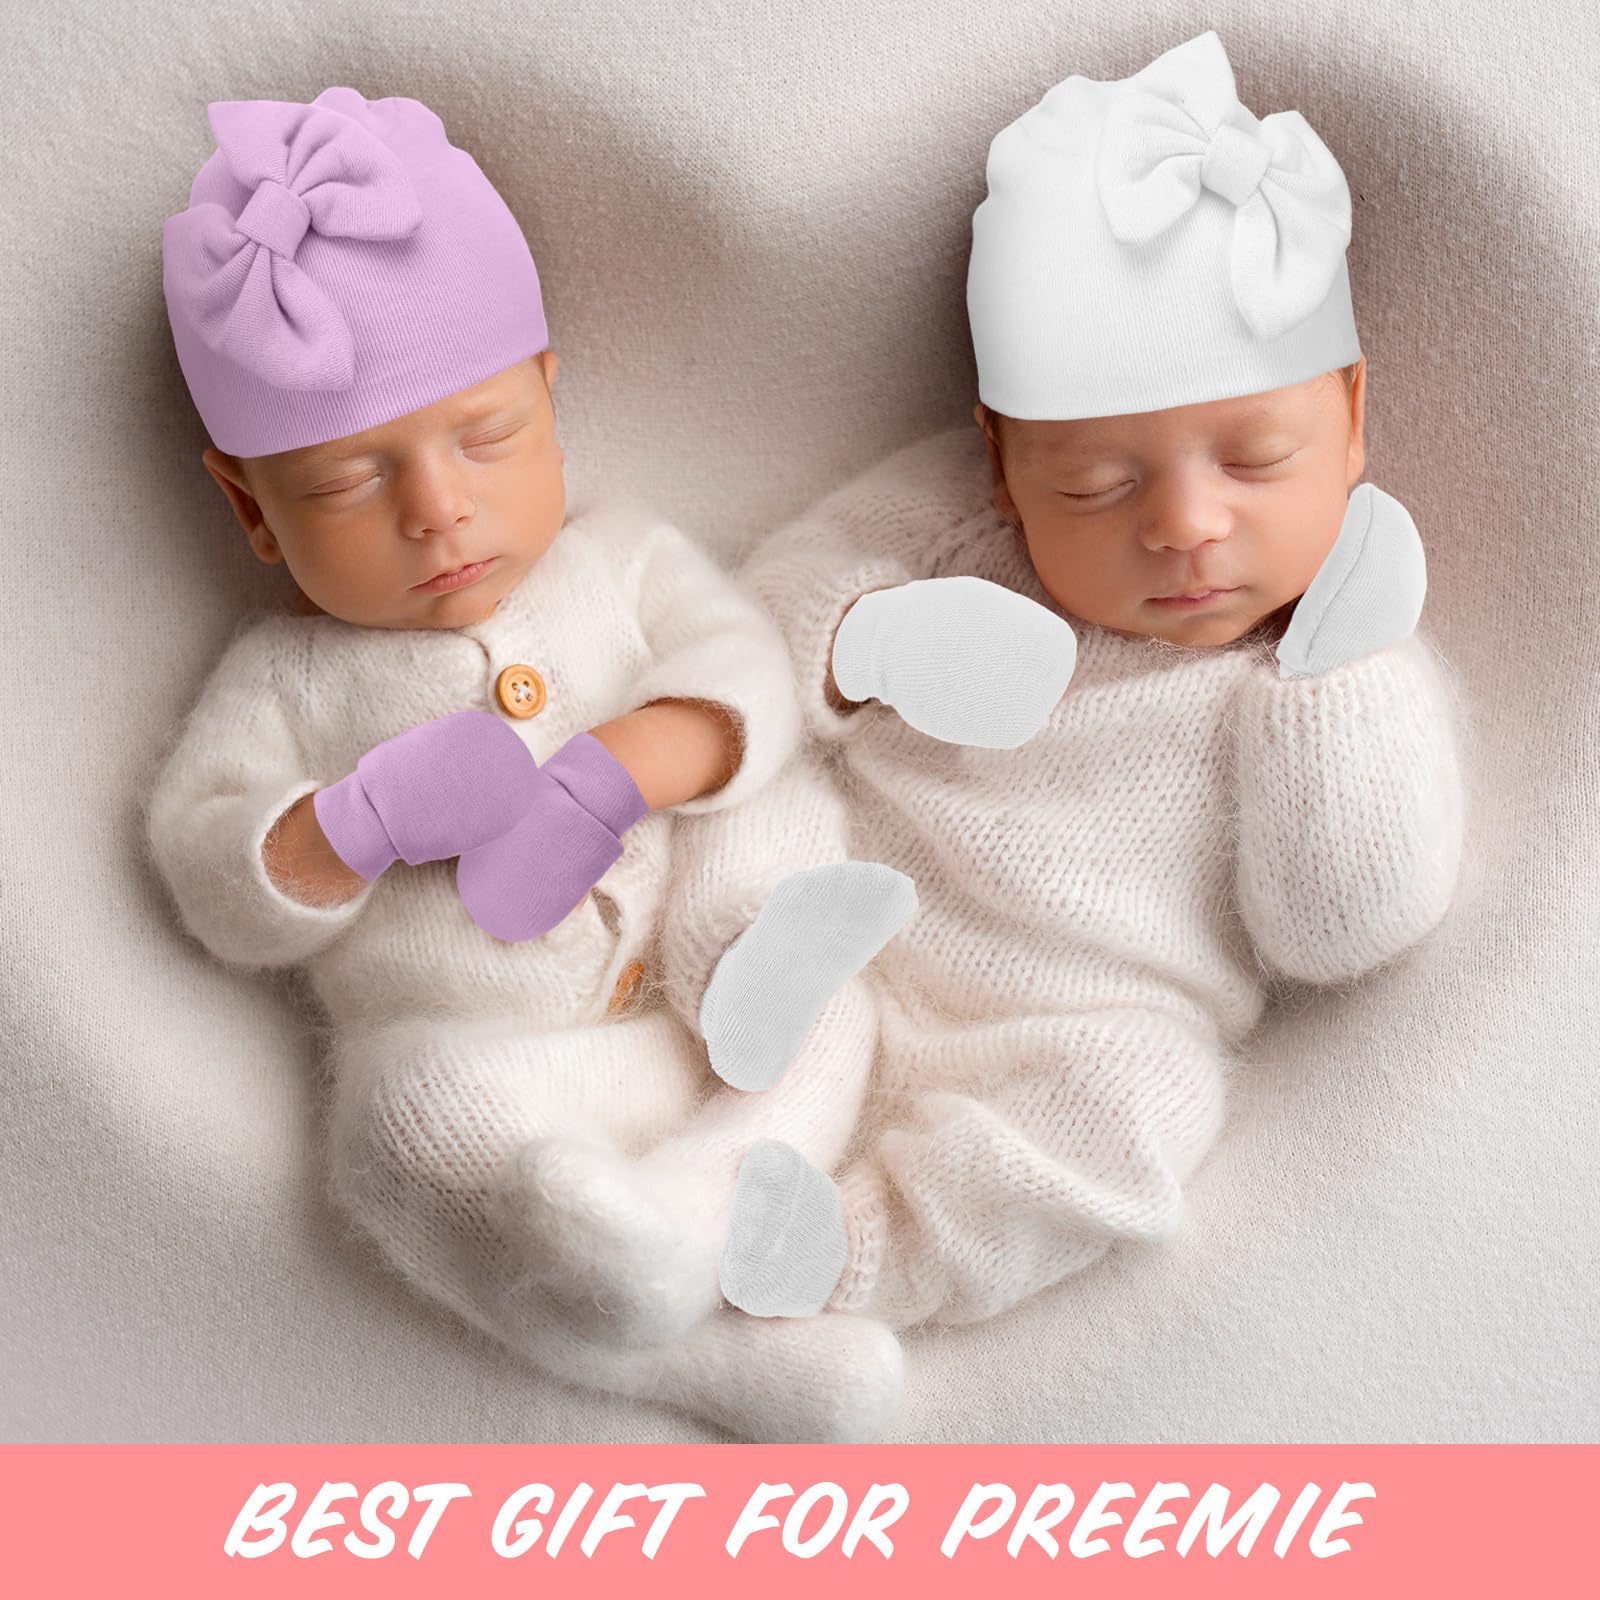 Toulite 4 Pack Preemie Hats and Socks Set Cotton Warm Bow Knot Preemie Caps,Mittens and No Scratch Preemie Warm Socks (Pink,white,purple,gray)